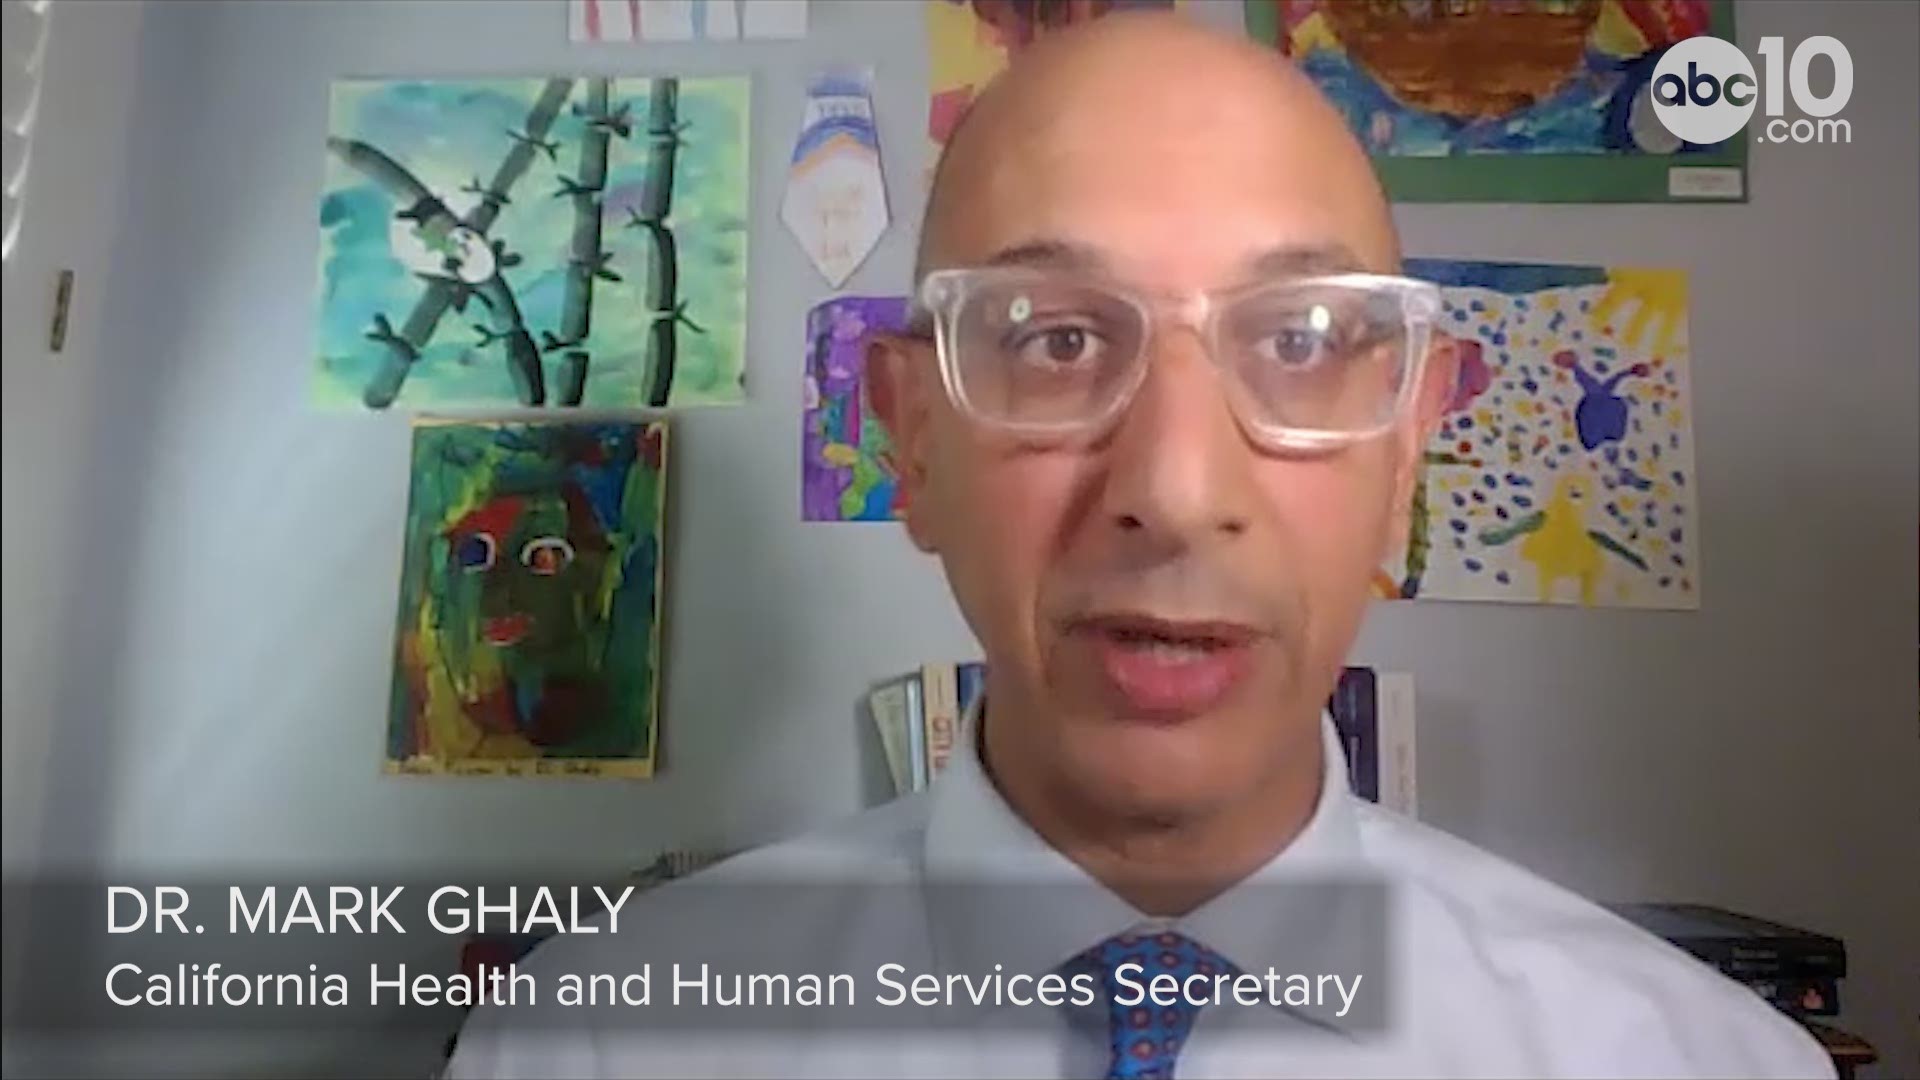 The California Department of Public Health announced new guidelines for masking in the classroom. Dr. Ghaly explains the new guidelines and what's to come.